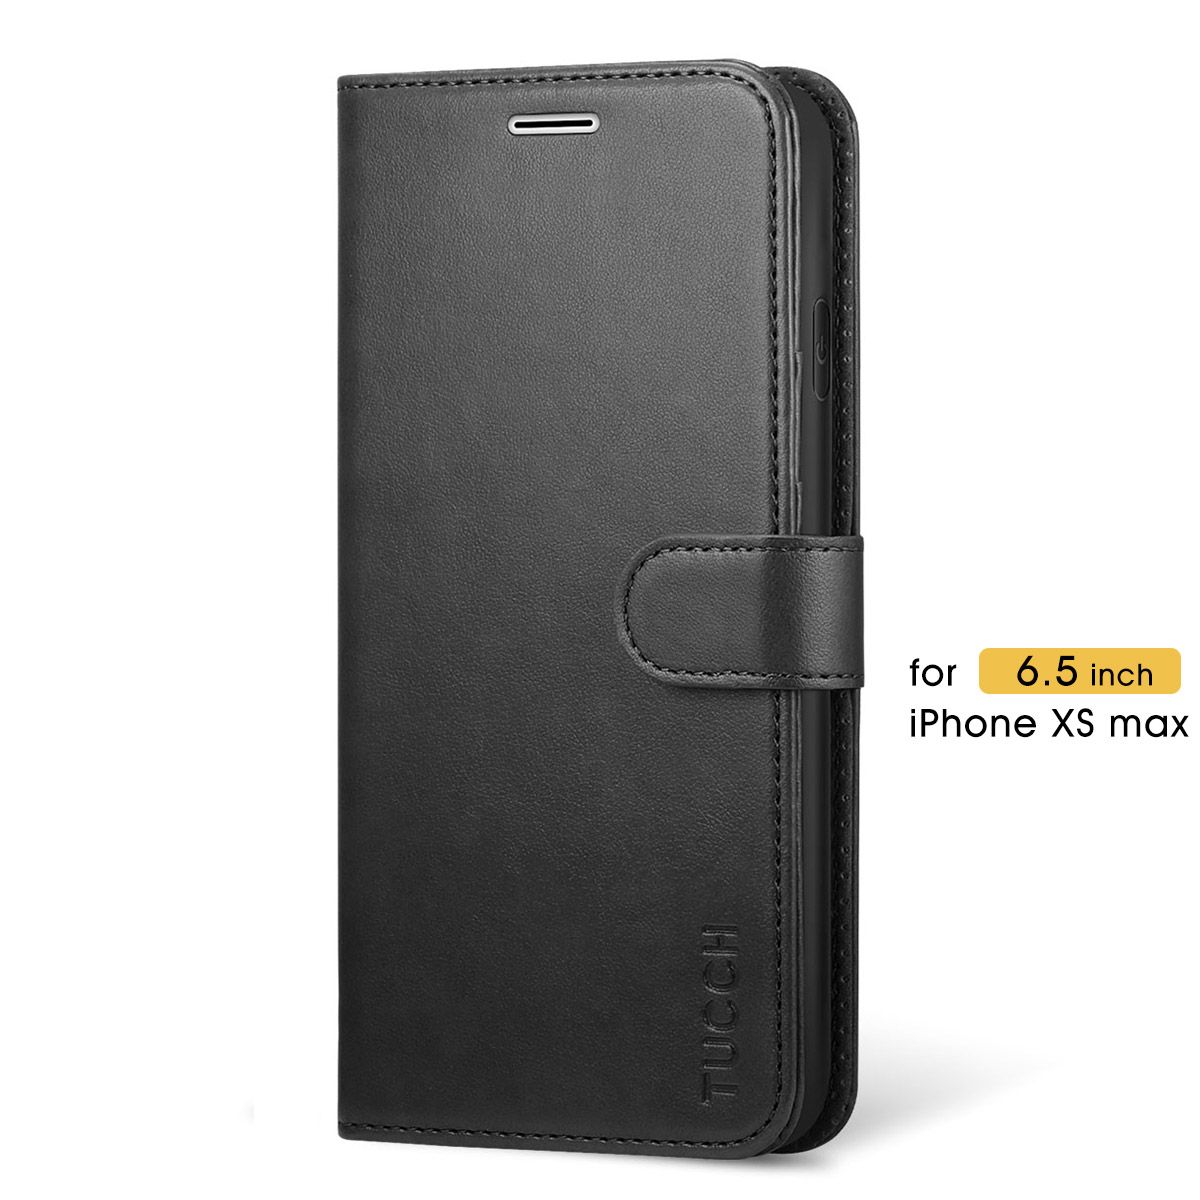 PU Leather Flip Case for iPhone Xs Max Durable Soft Wallet Cover for iPhone Xs Max 